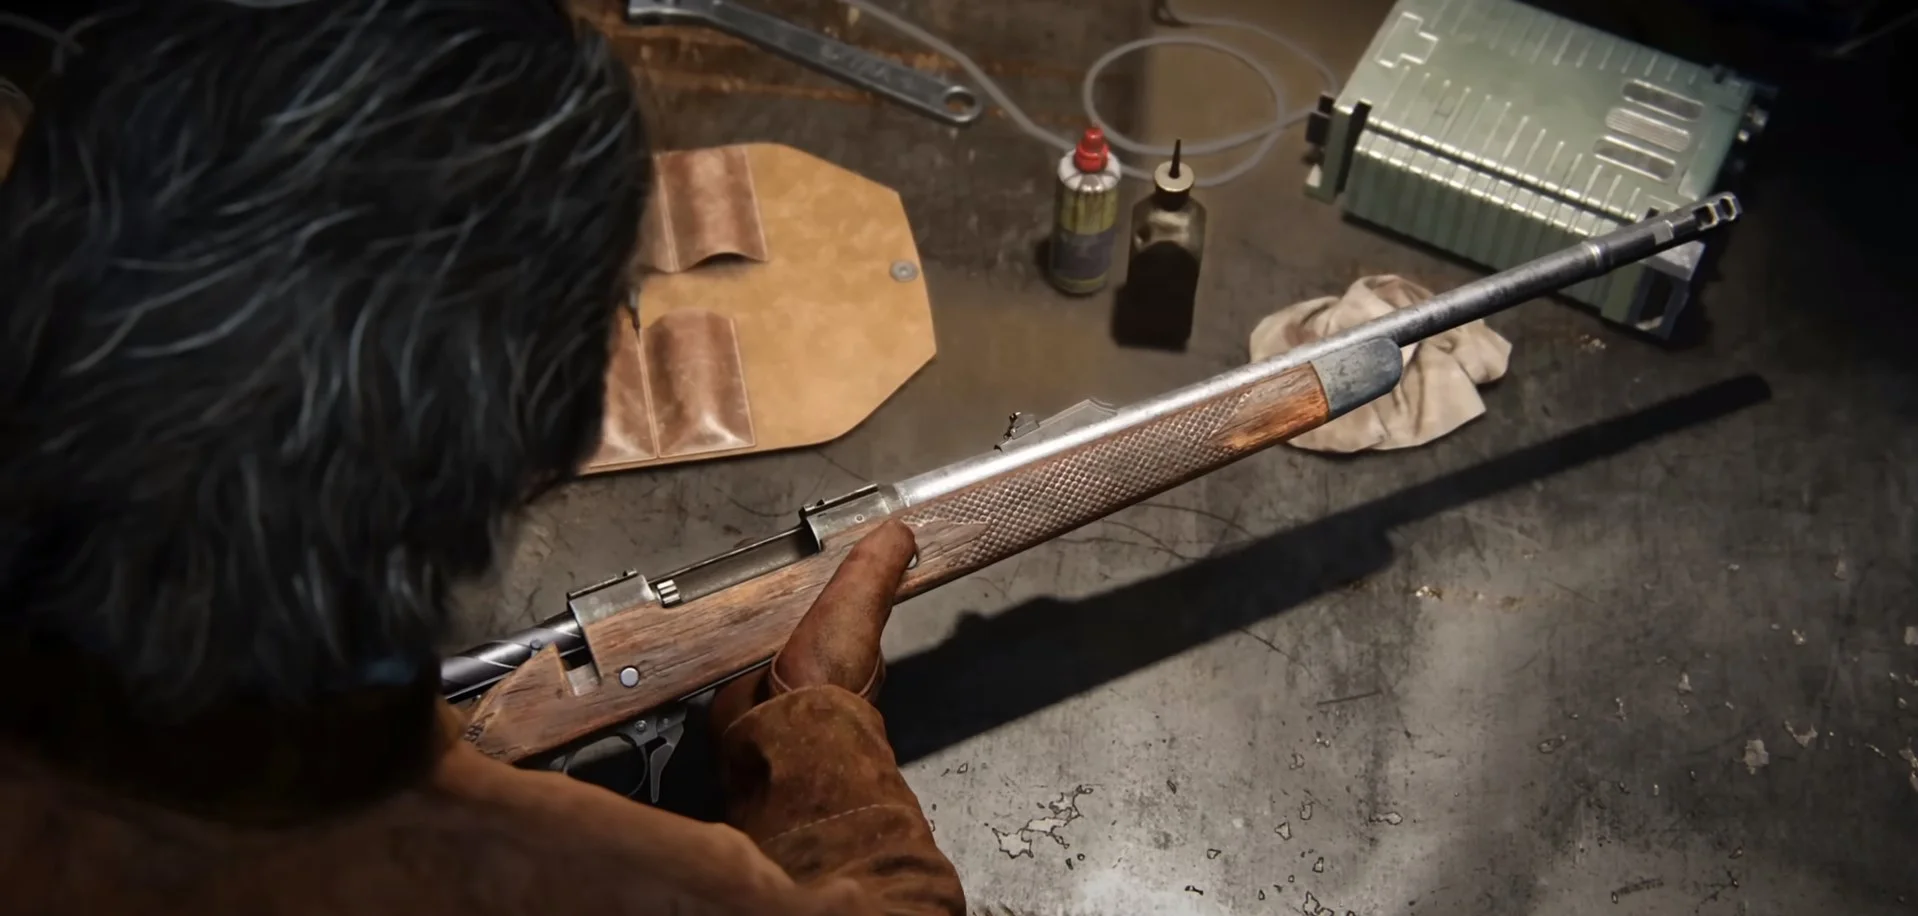 The Last of Us 1: All Weapons Locations and Upgrades